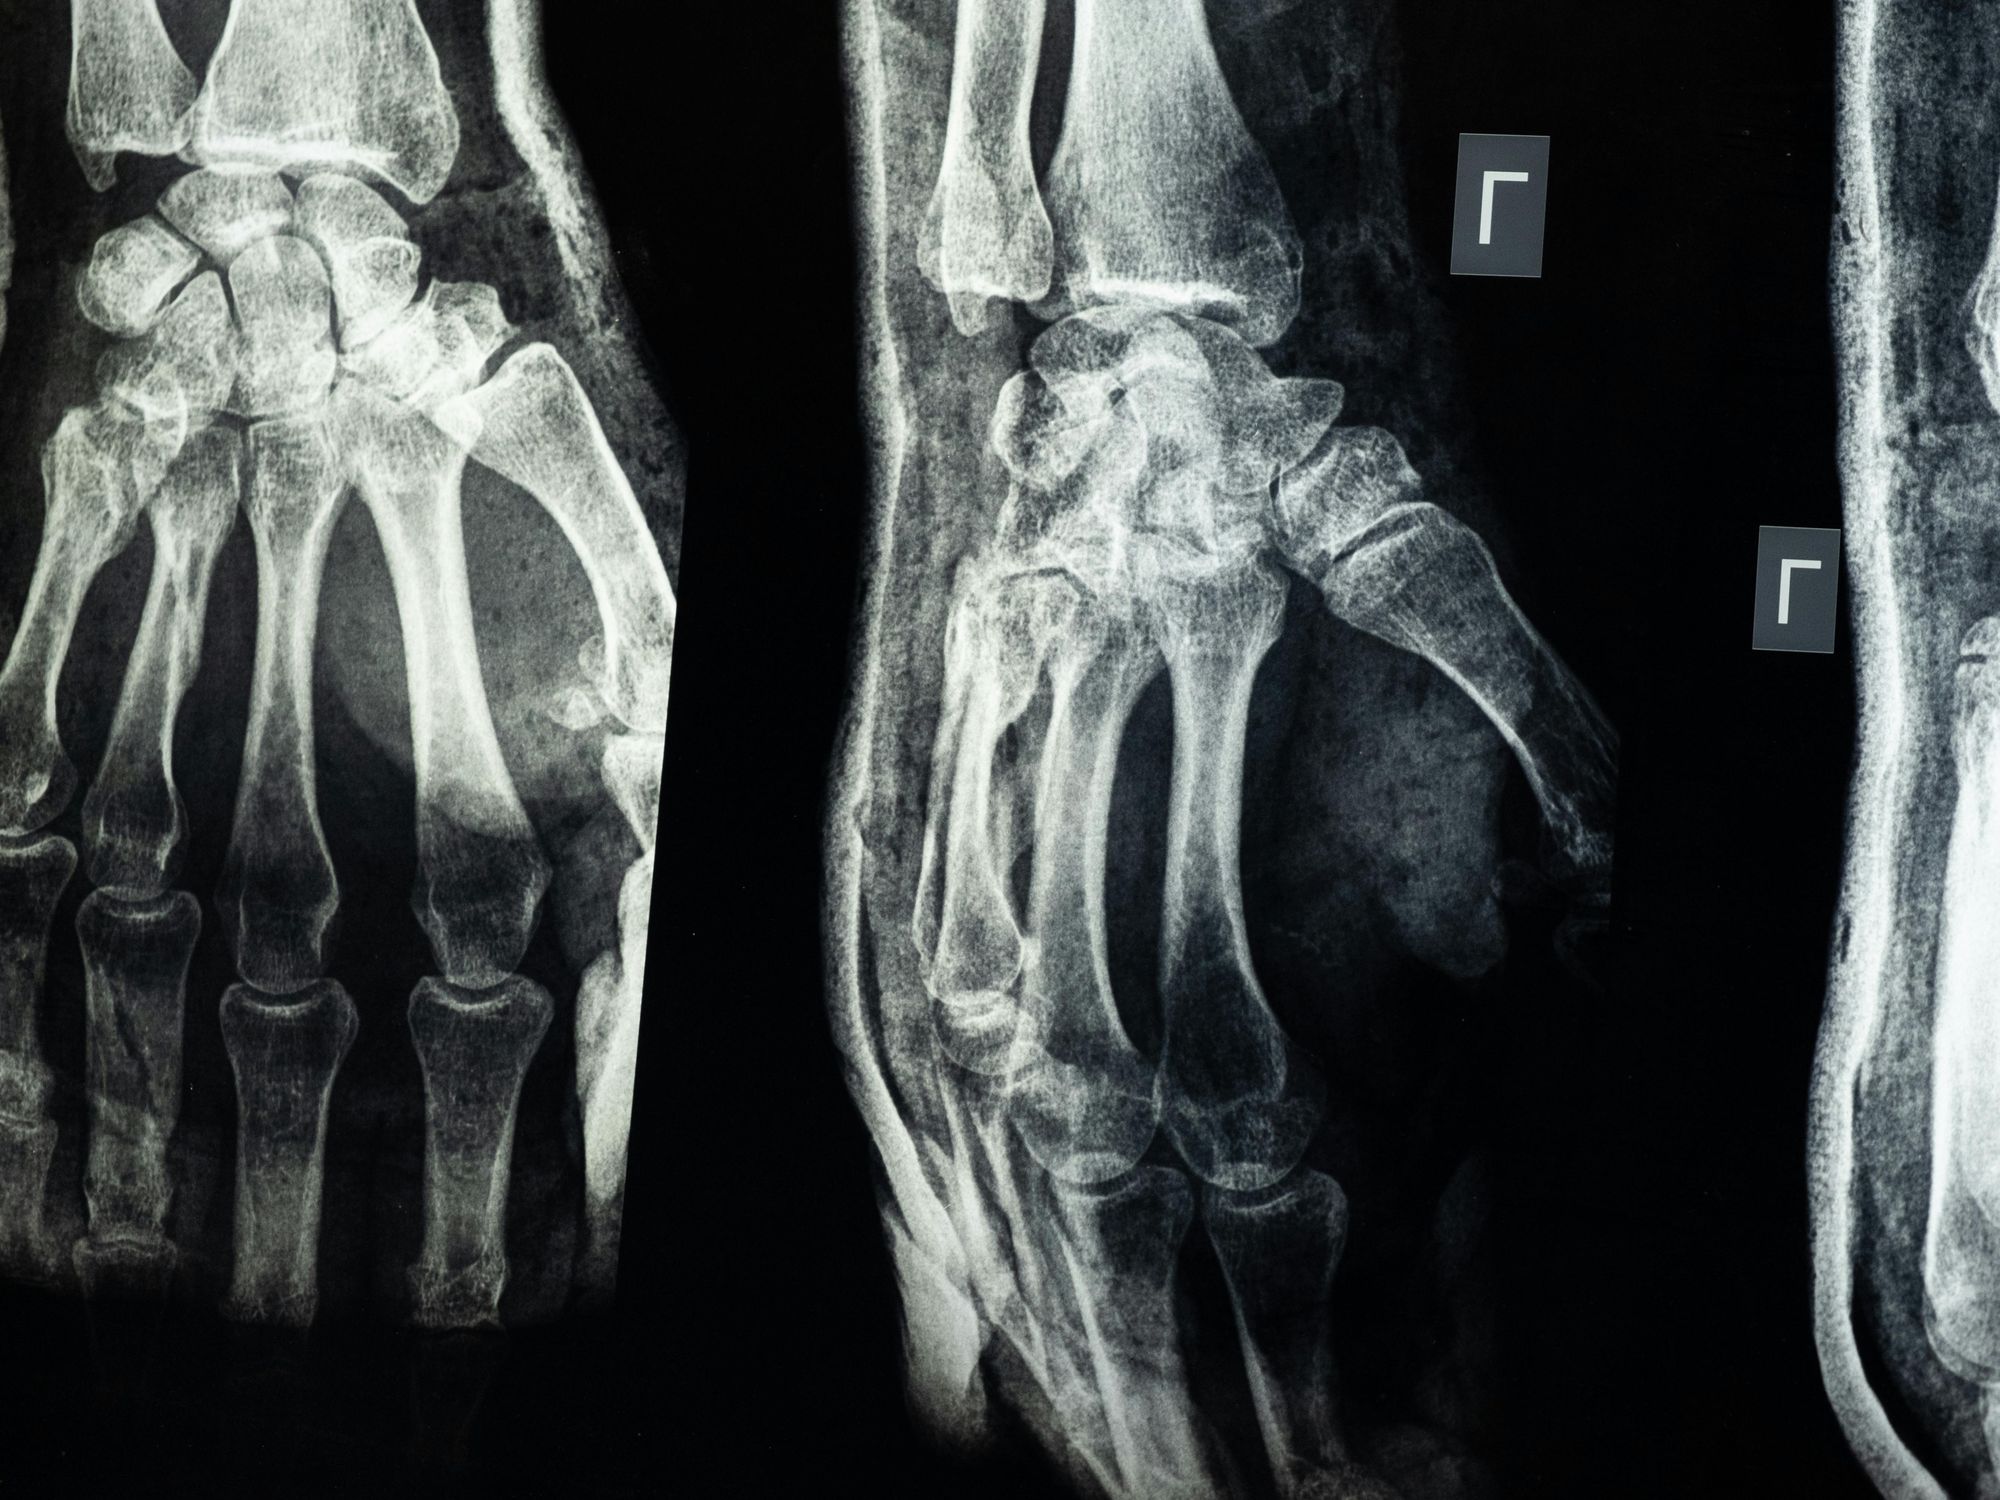 X-ray image showing the skeletal structure of a hand